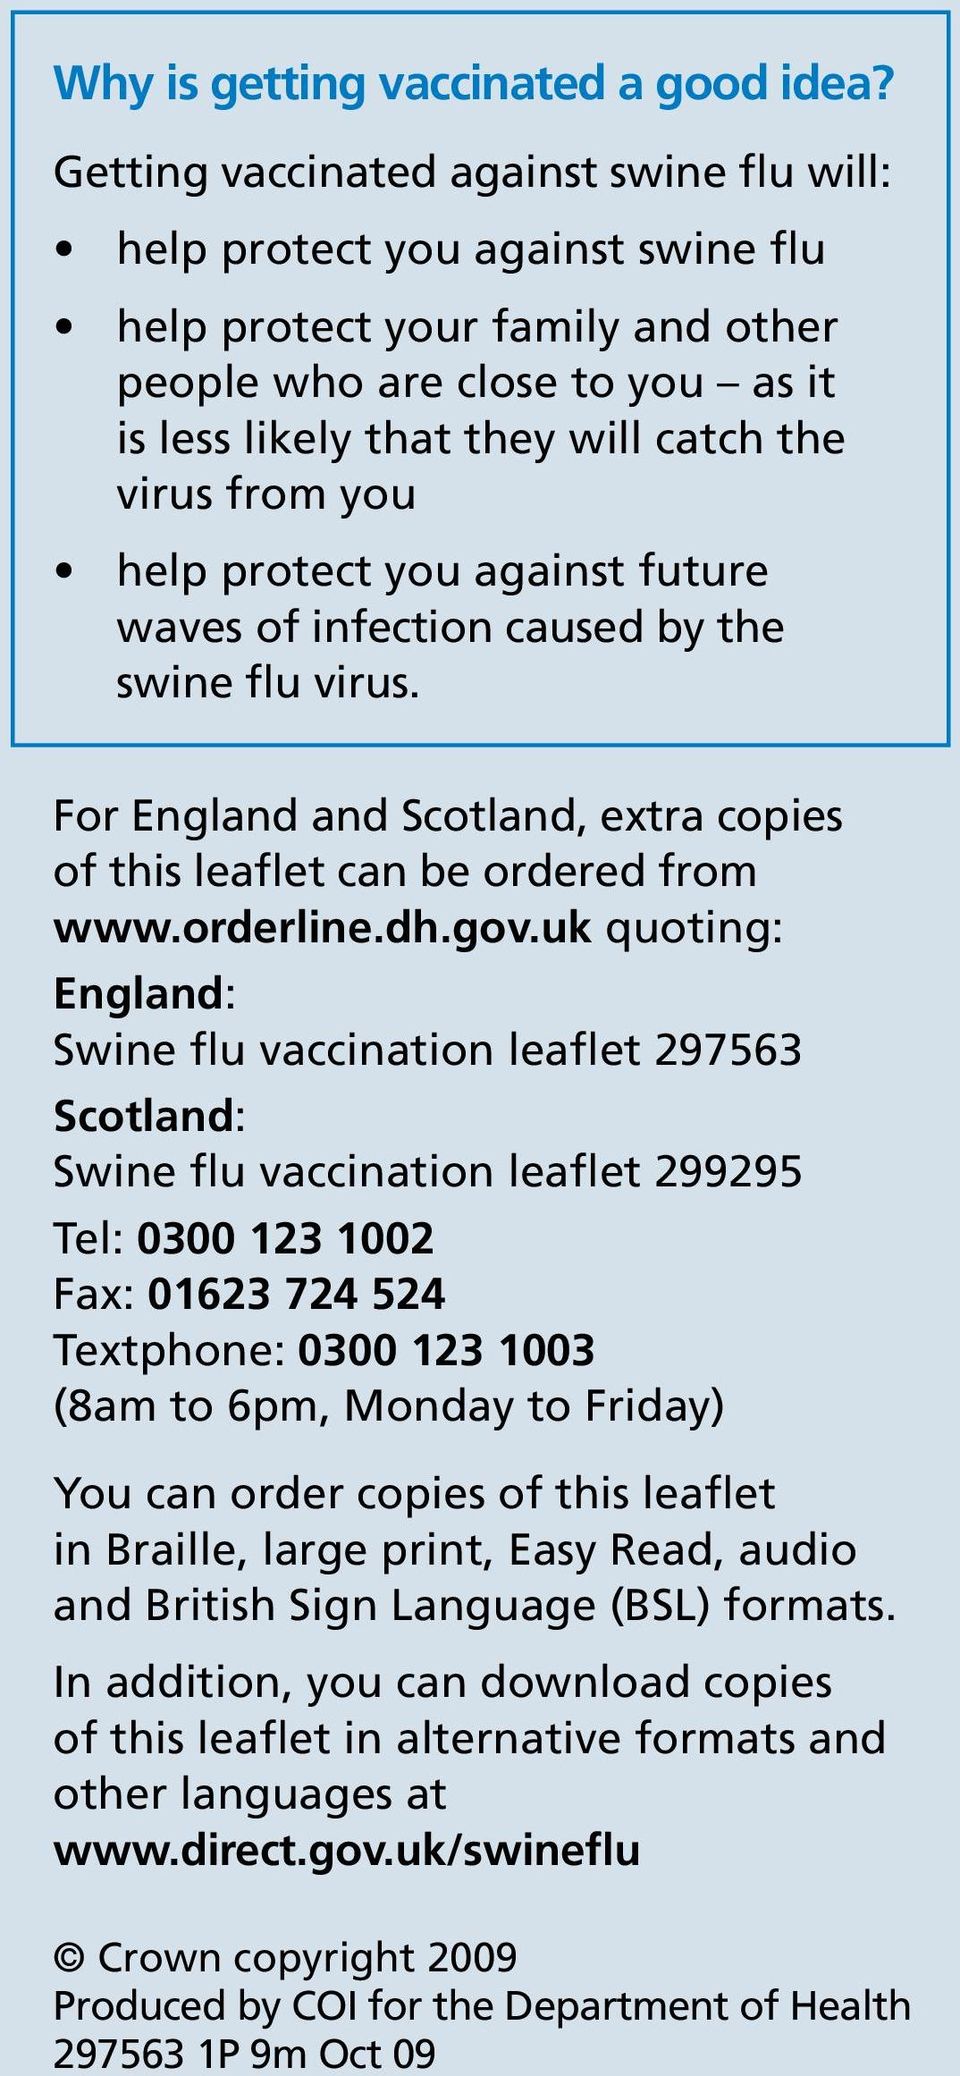 you help protect you against future waves of infection caused by the swine flu virus. For England and Scotland, extra copies of this leaflet can be ordered from www.orderline.dh.gov.